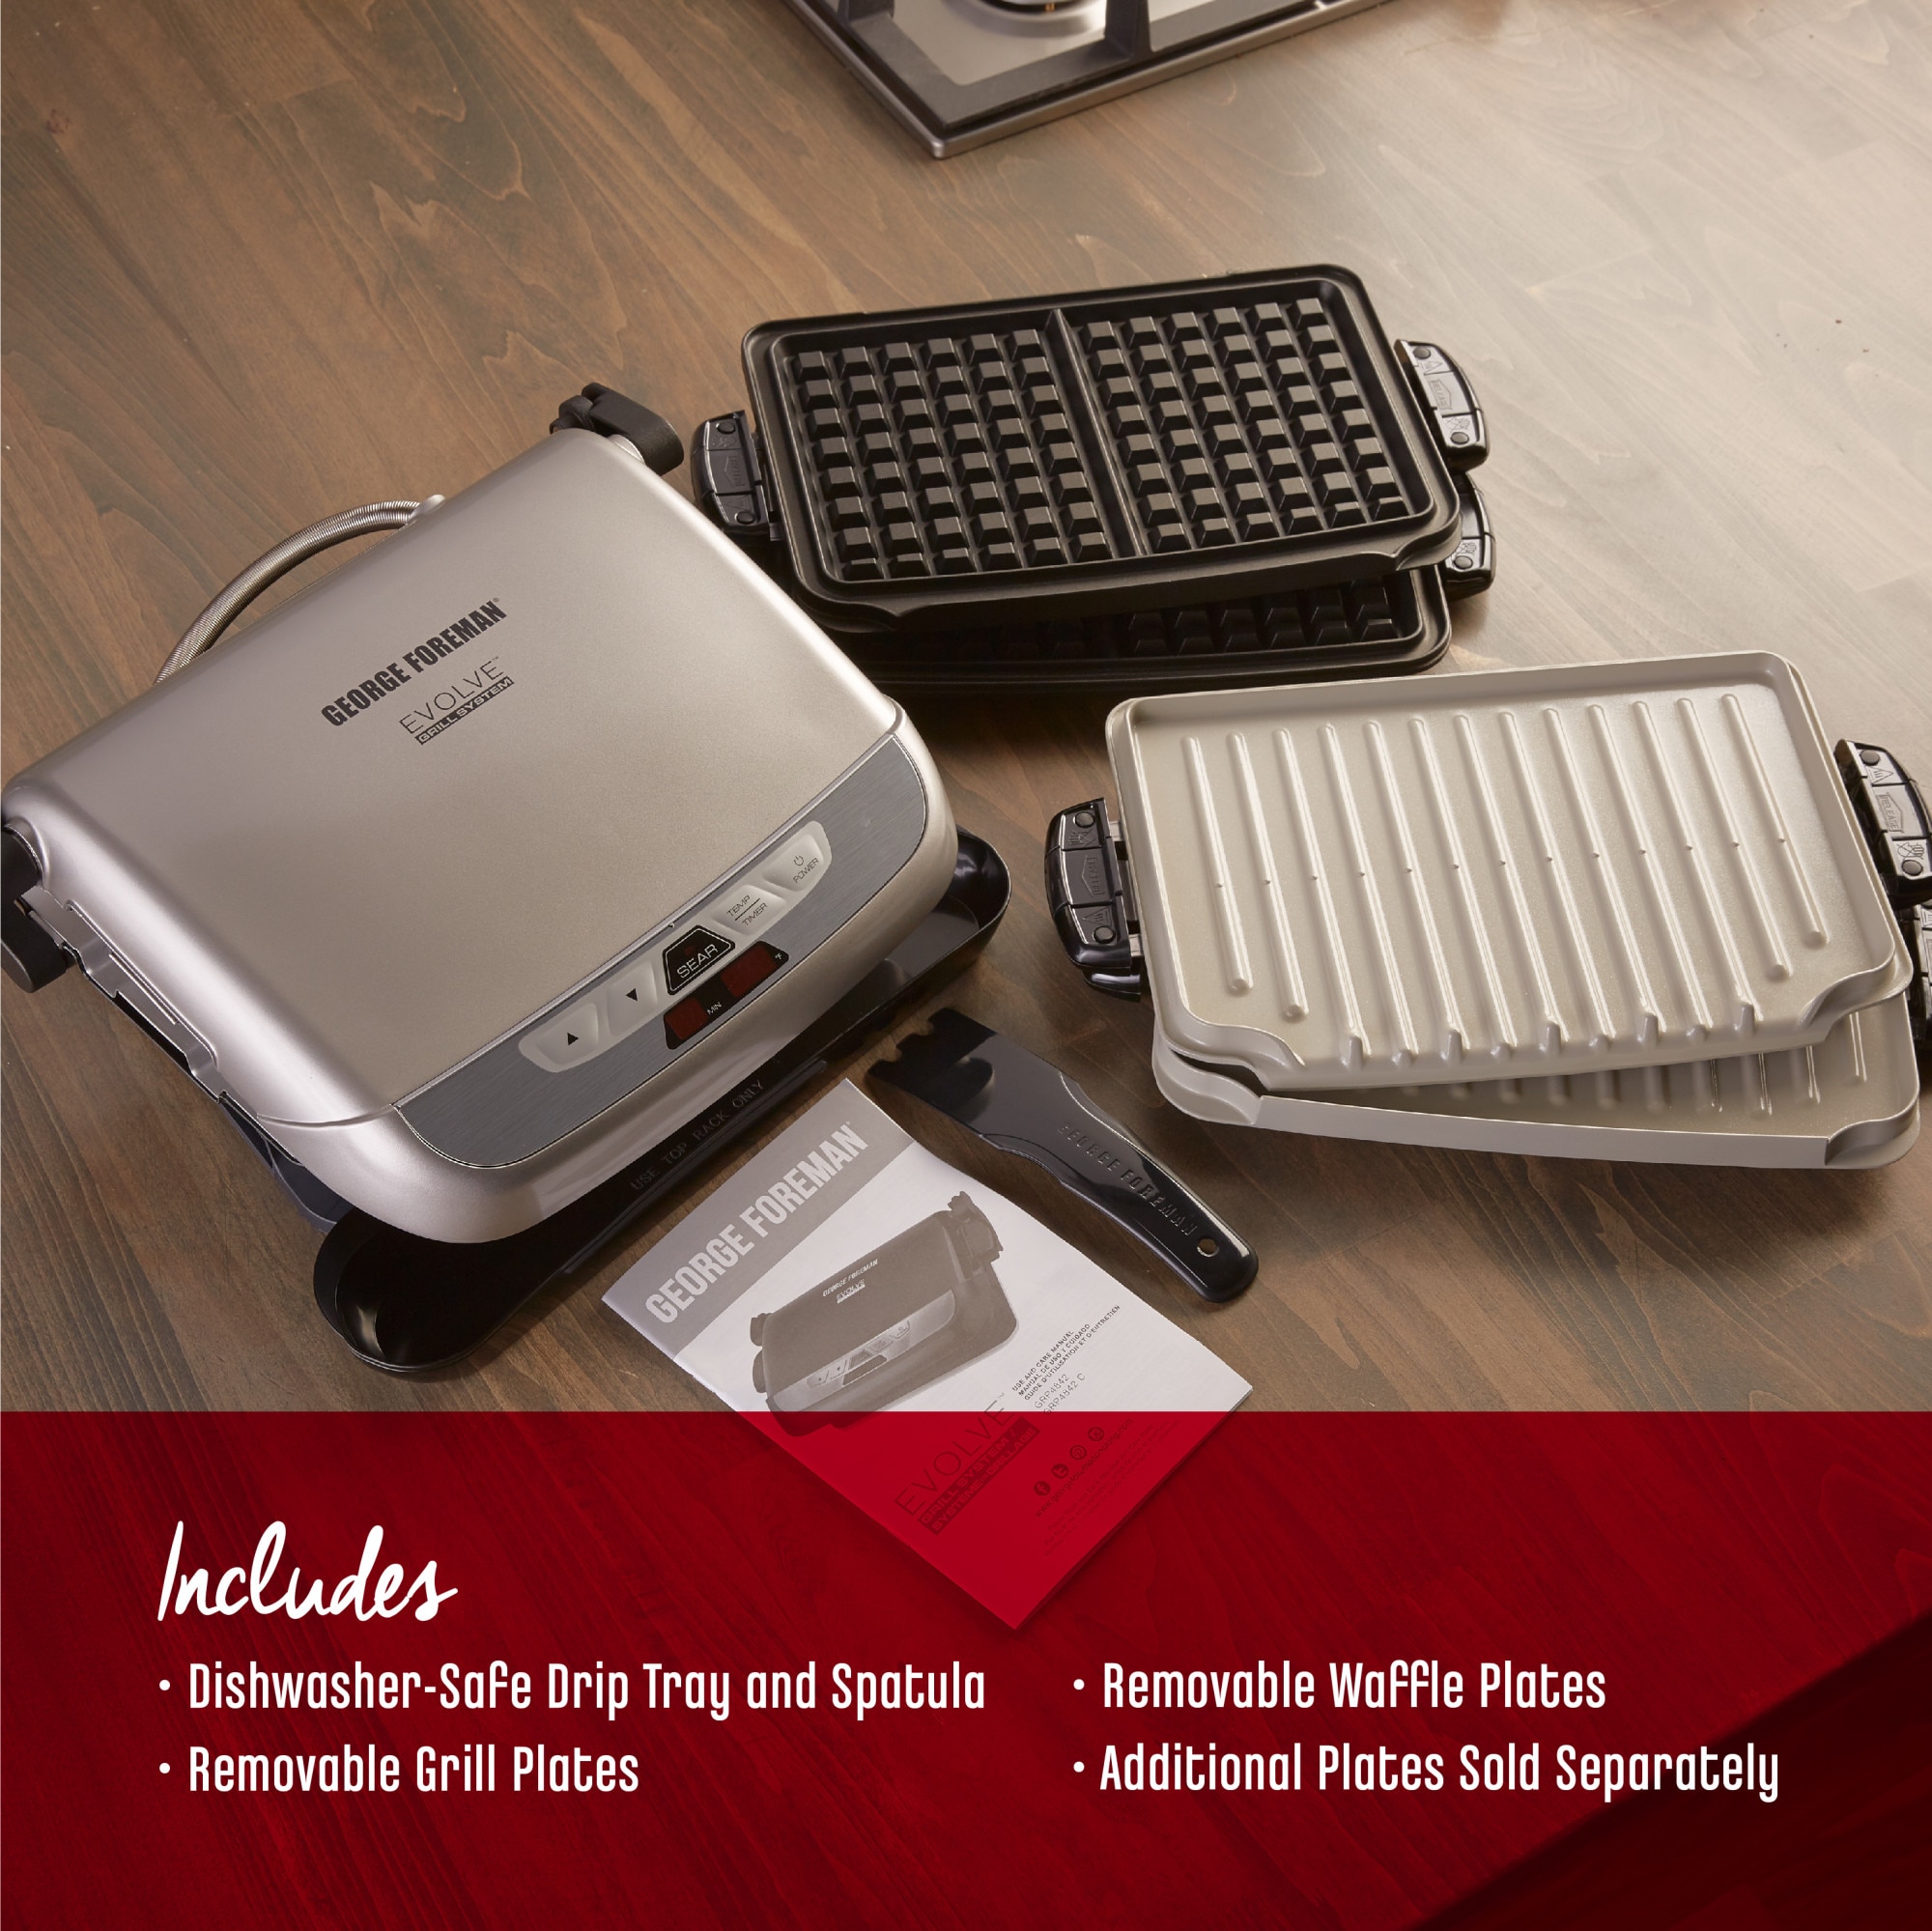 George Foreman 9.2-in L x 6.69-in W Non-Stick Residential in the Indoor  Grills department at